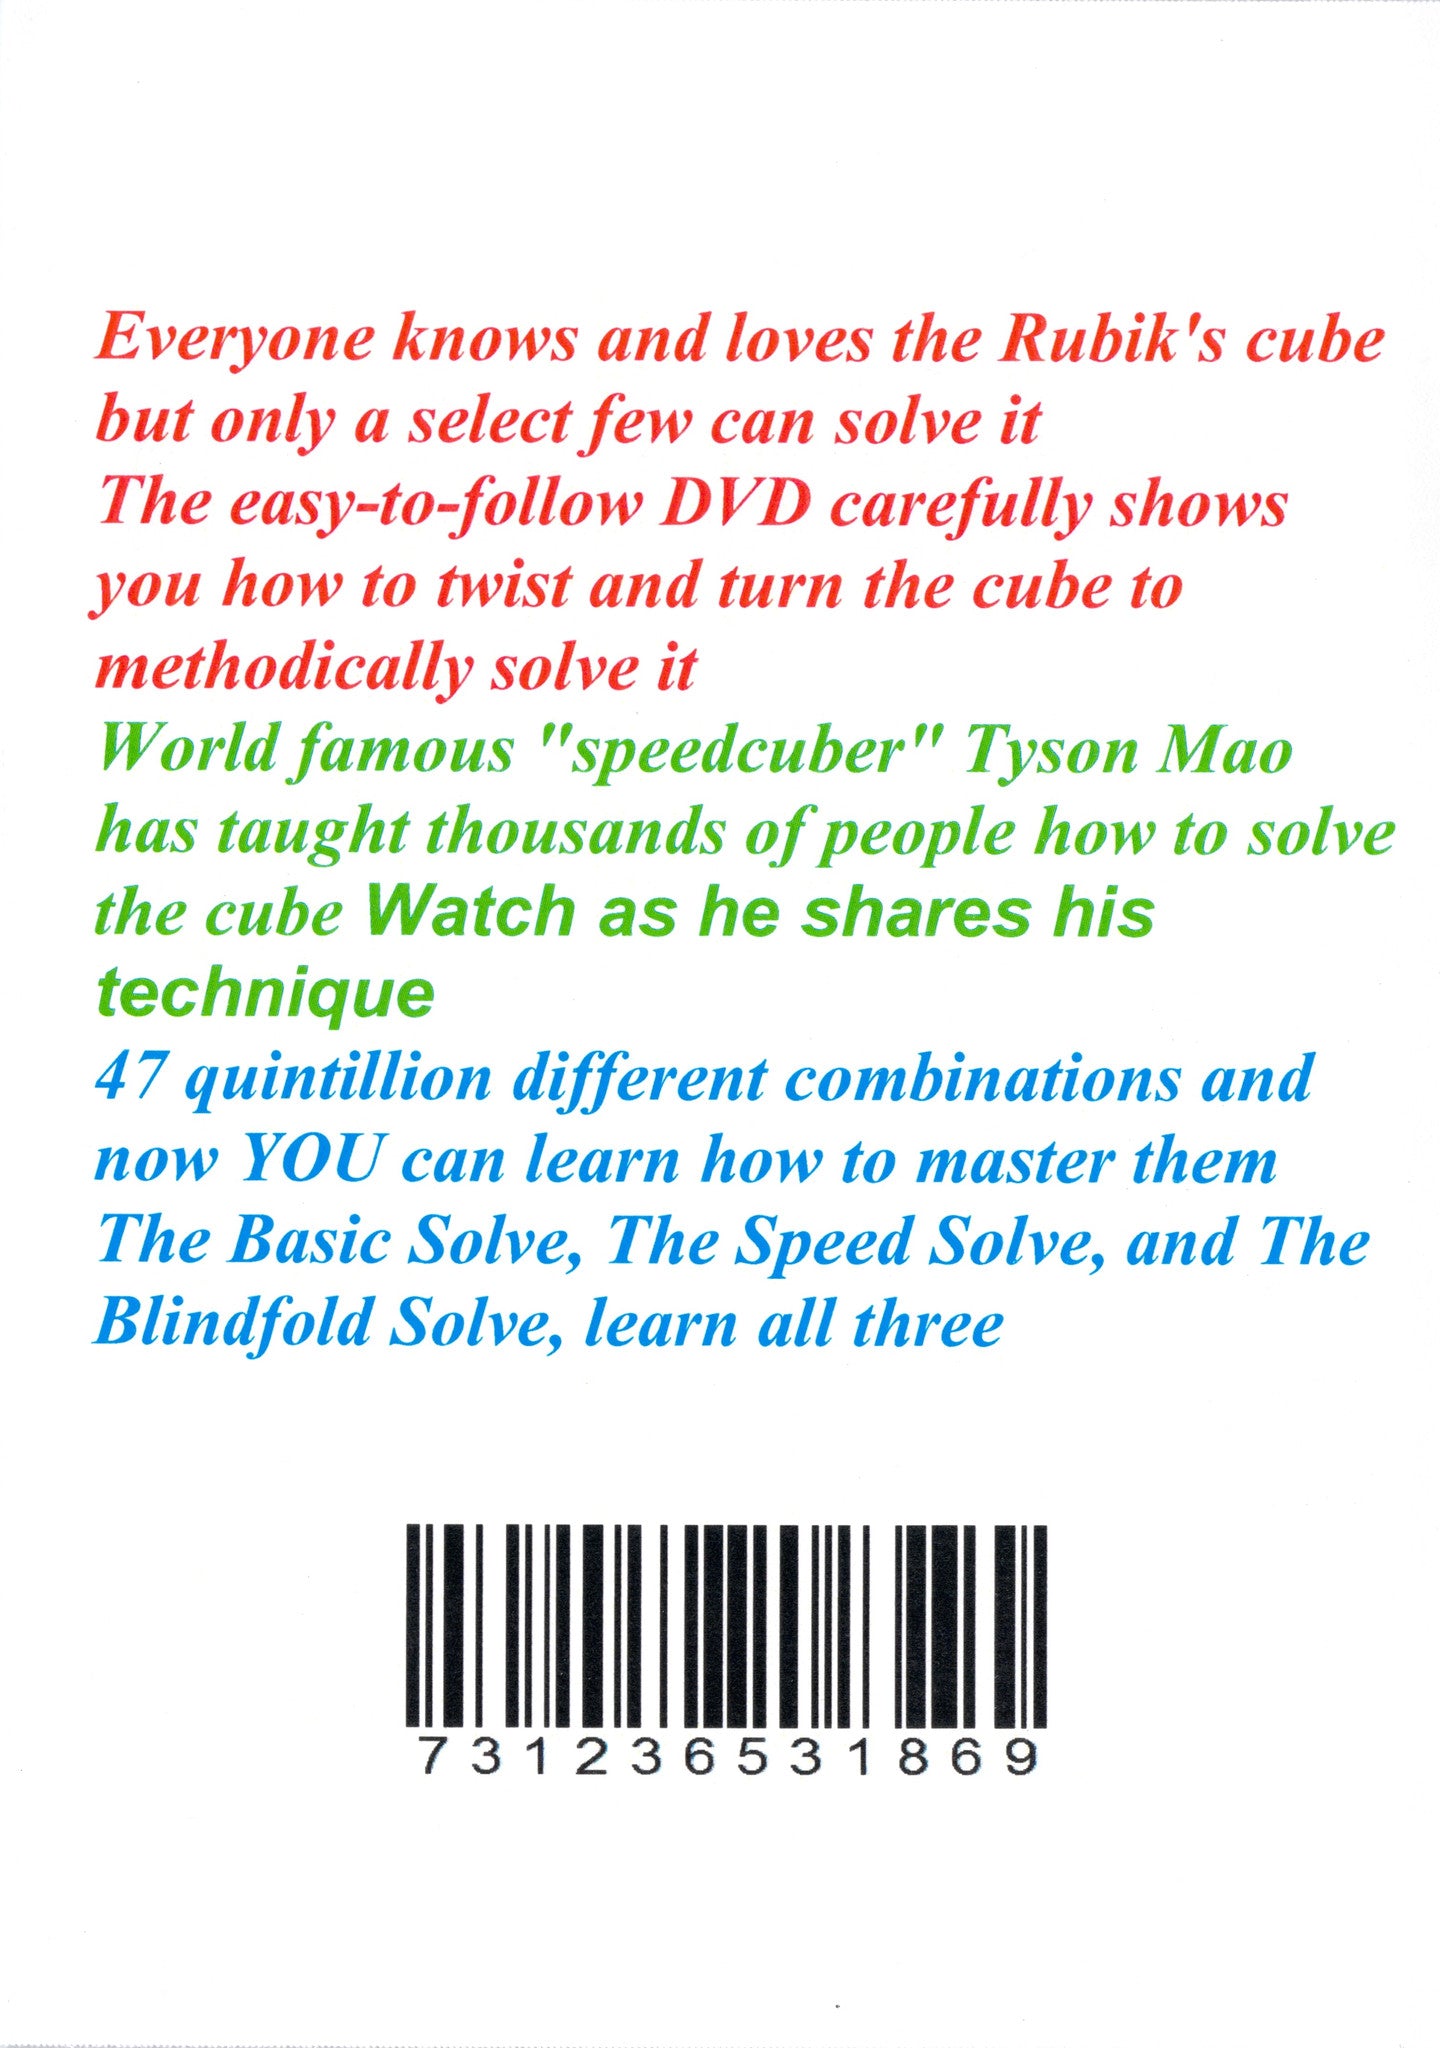 You CAN Do The Rubik's Cube - DVD